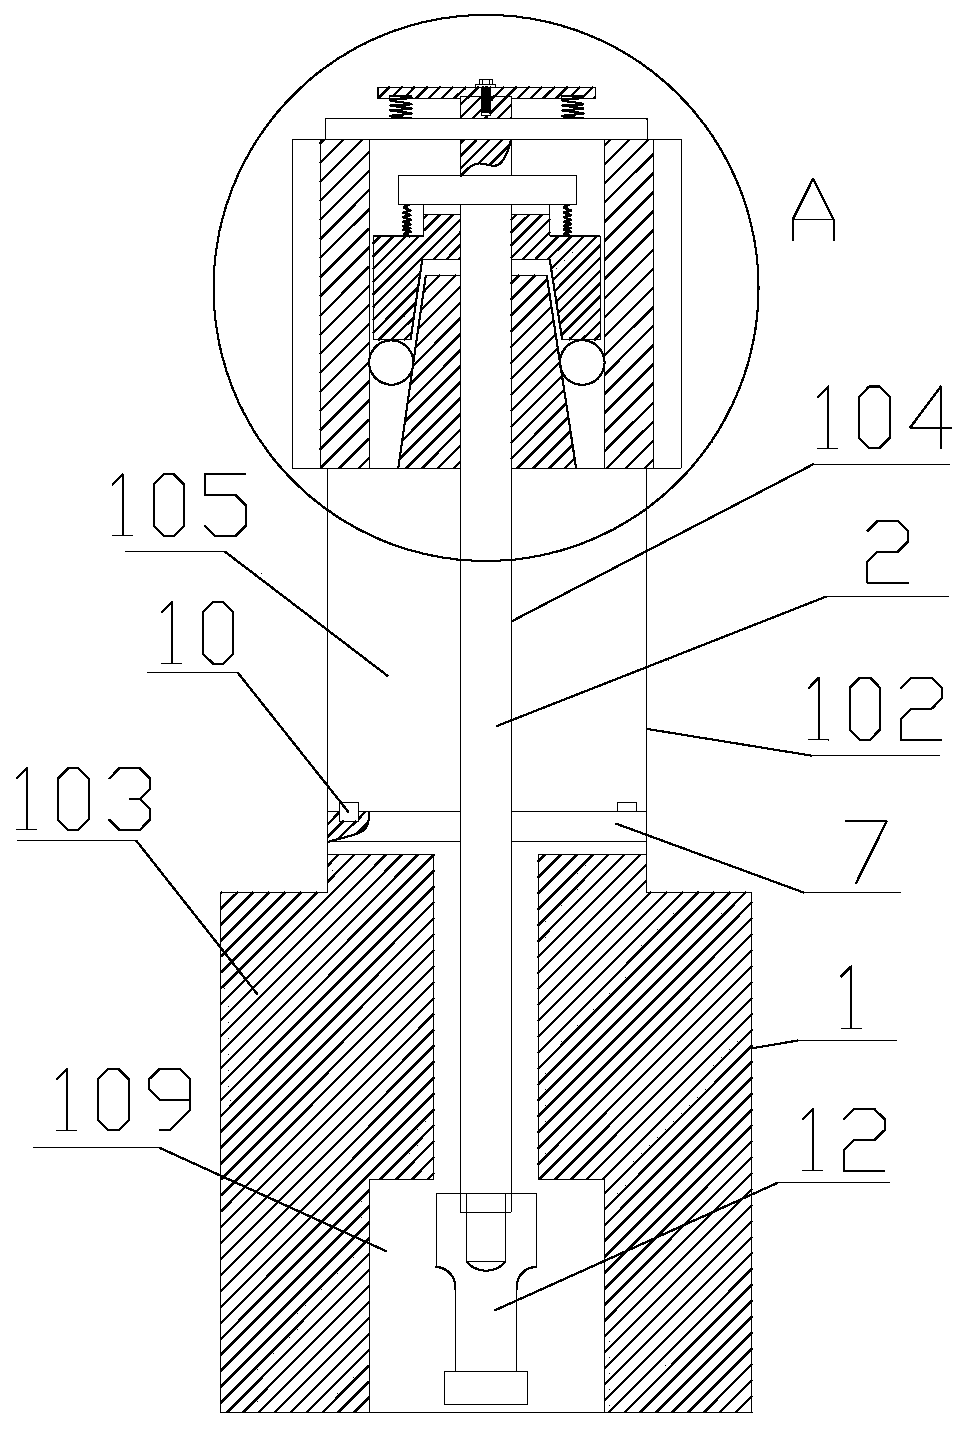 A gear high-precision hobbing fixture and its use method